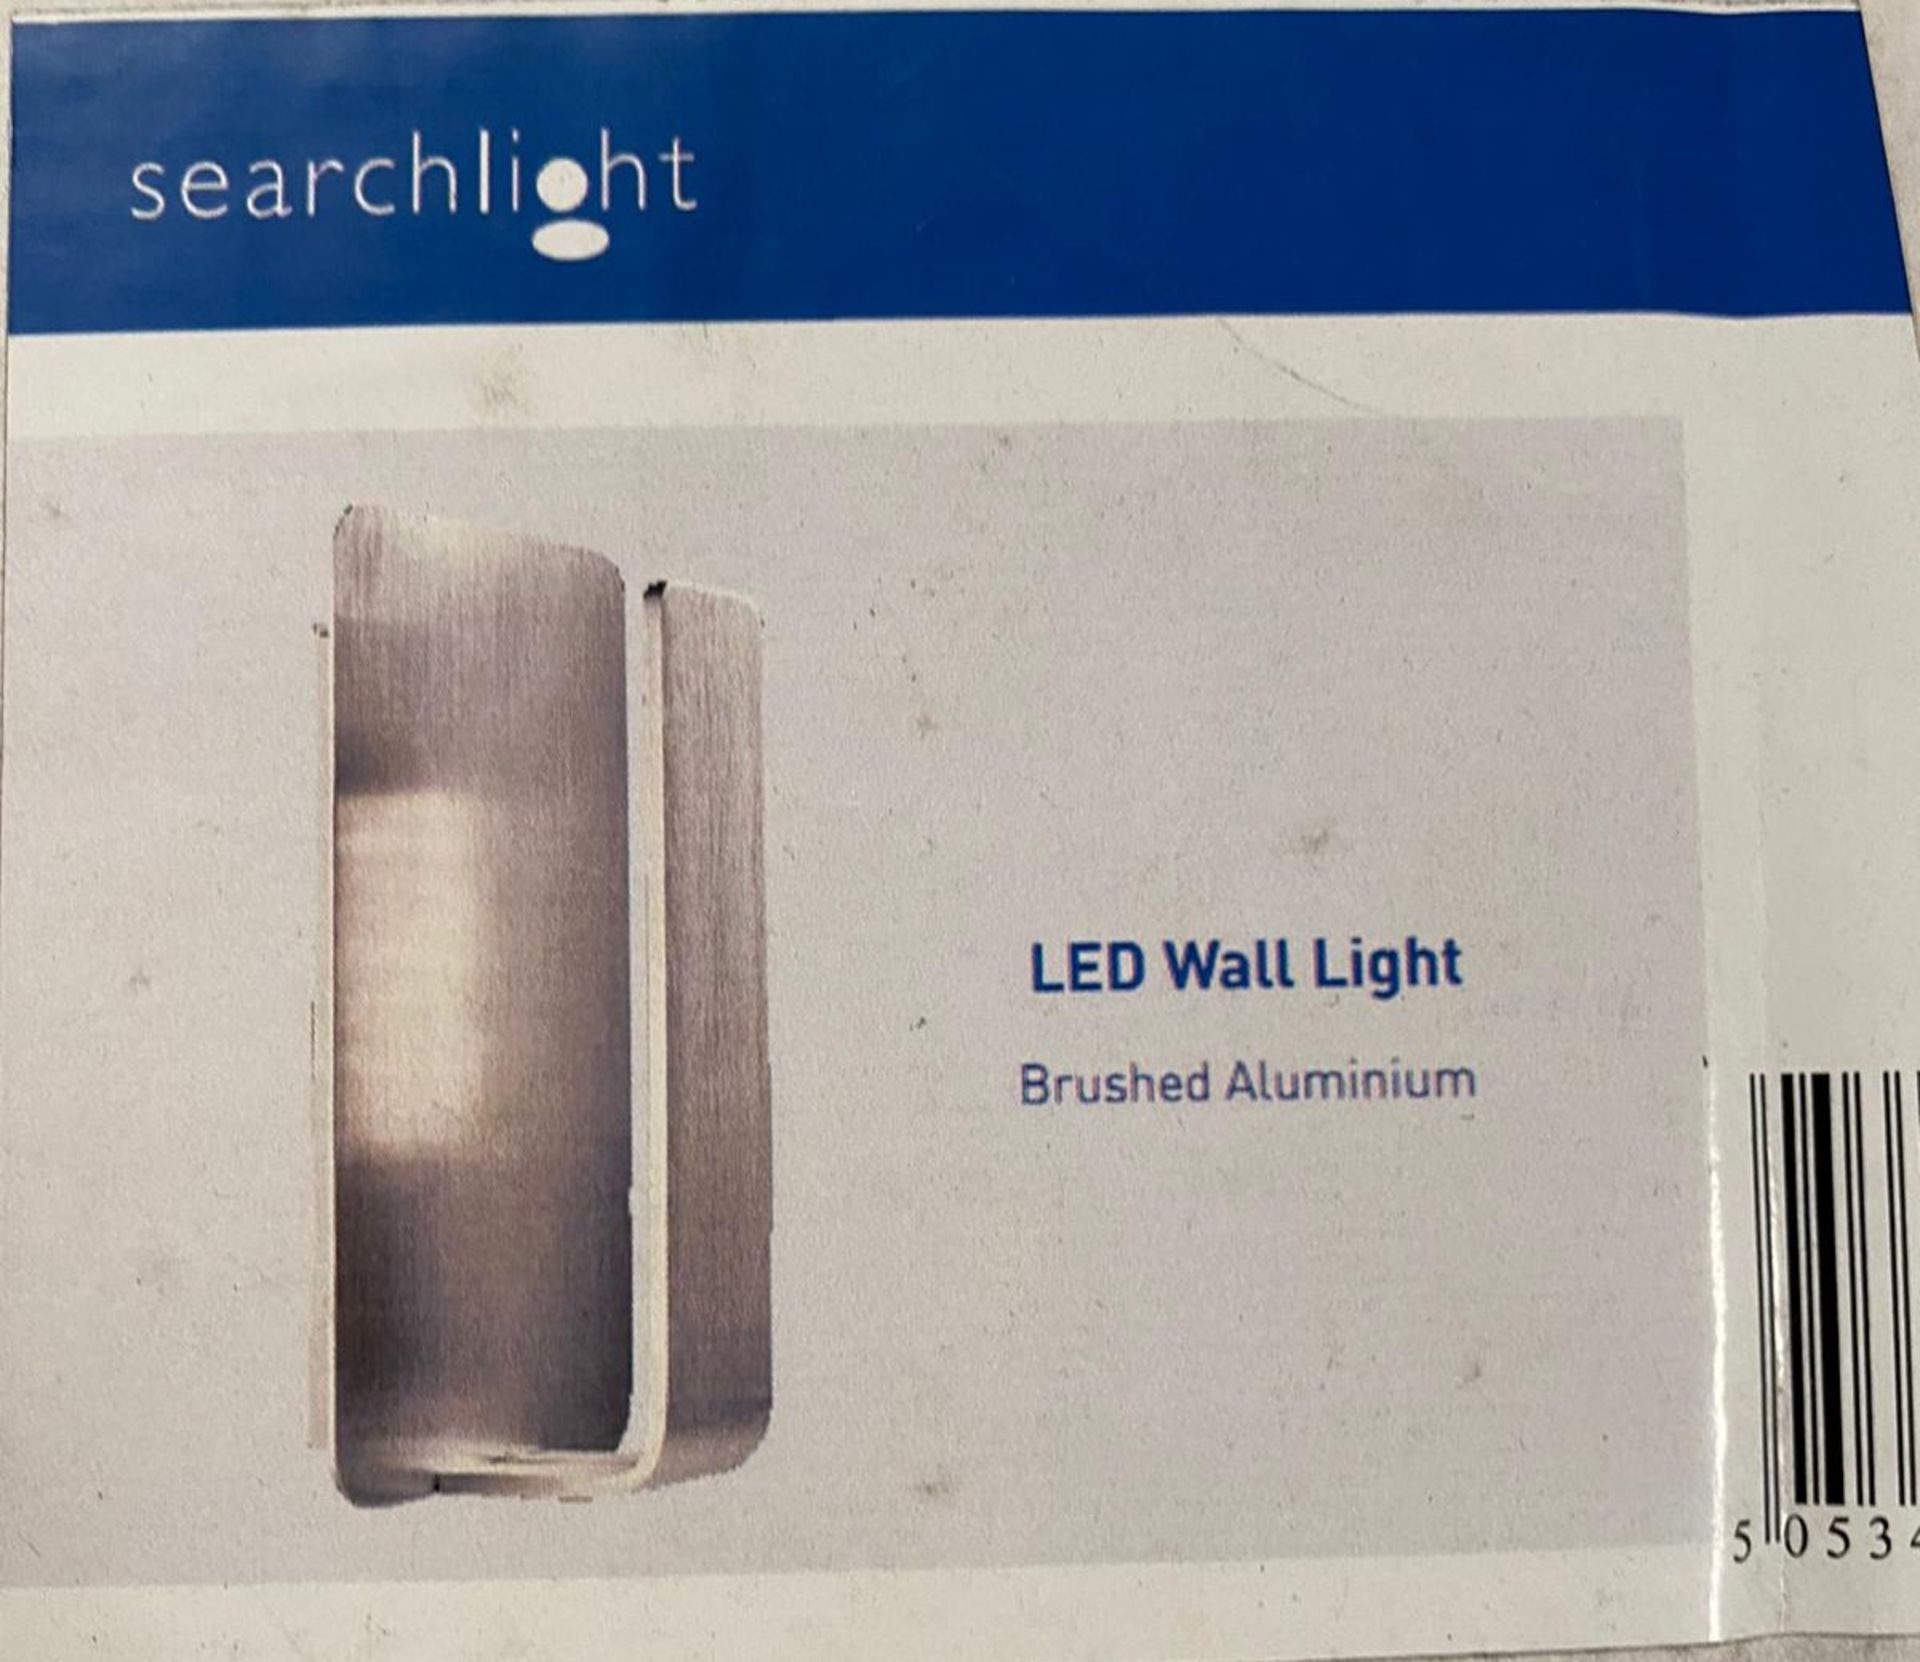 2 x Searchlight LED Wall Light in Brushed Aluminium - Ref: 1898SI - New and Boxed - RRP: £70(each) - Image 4 of 4